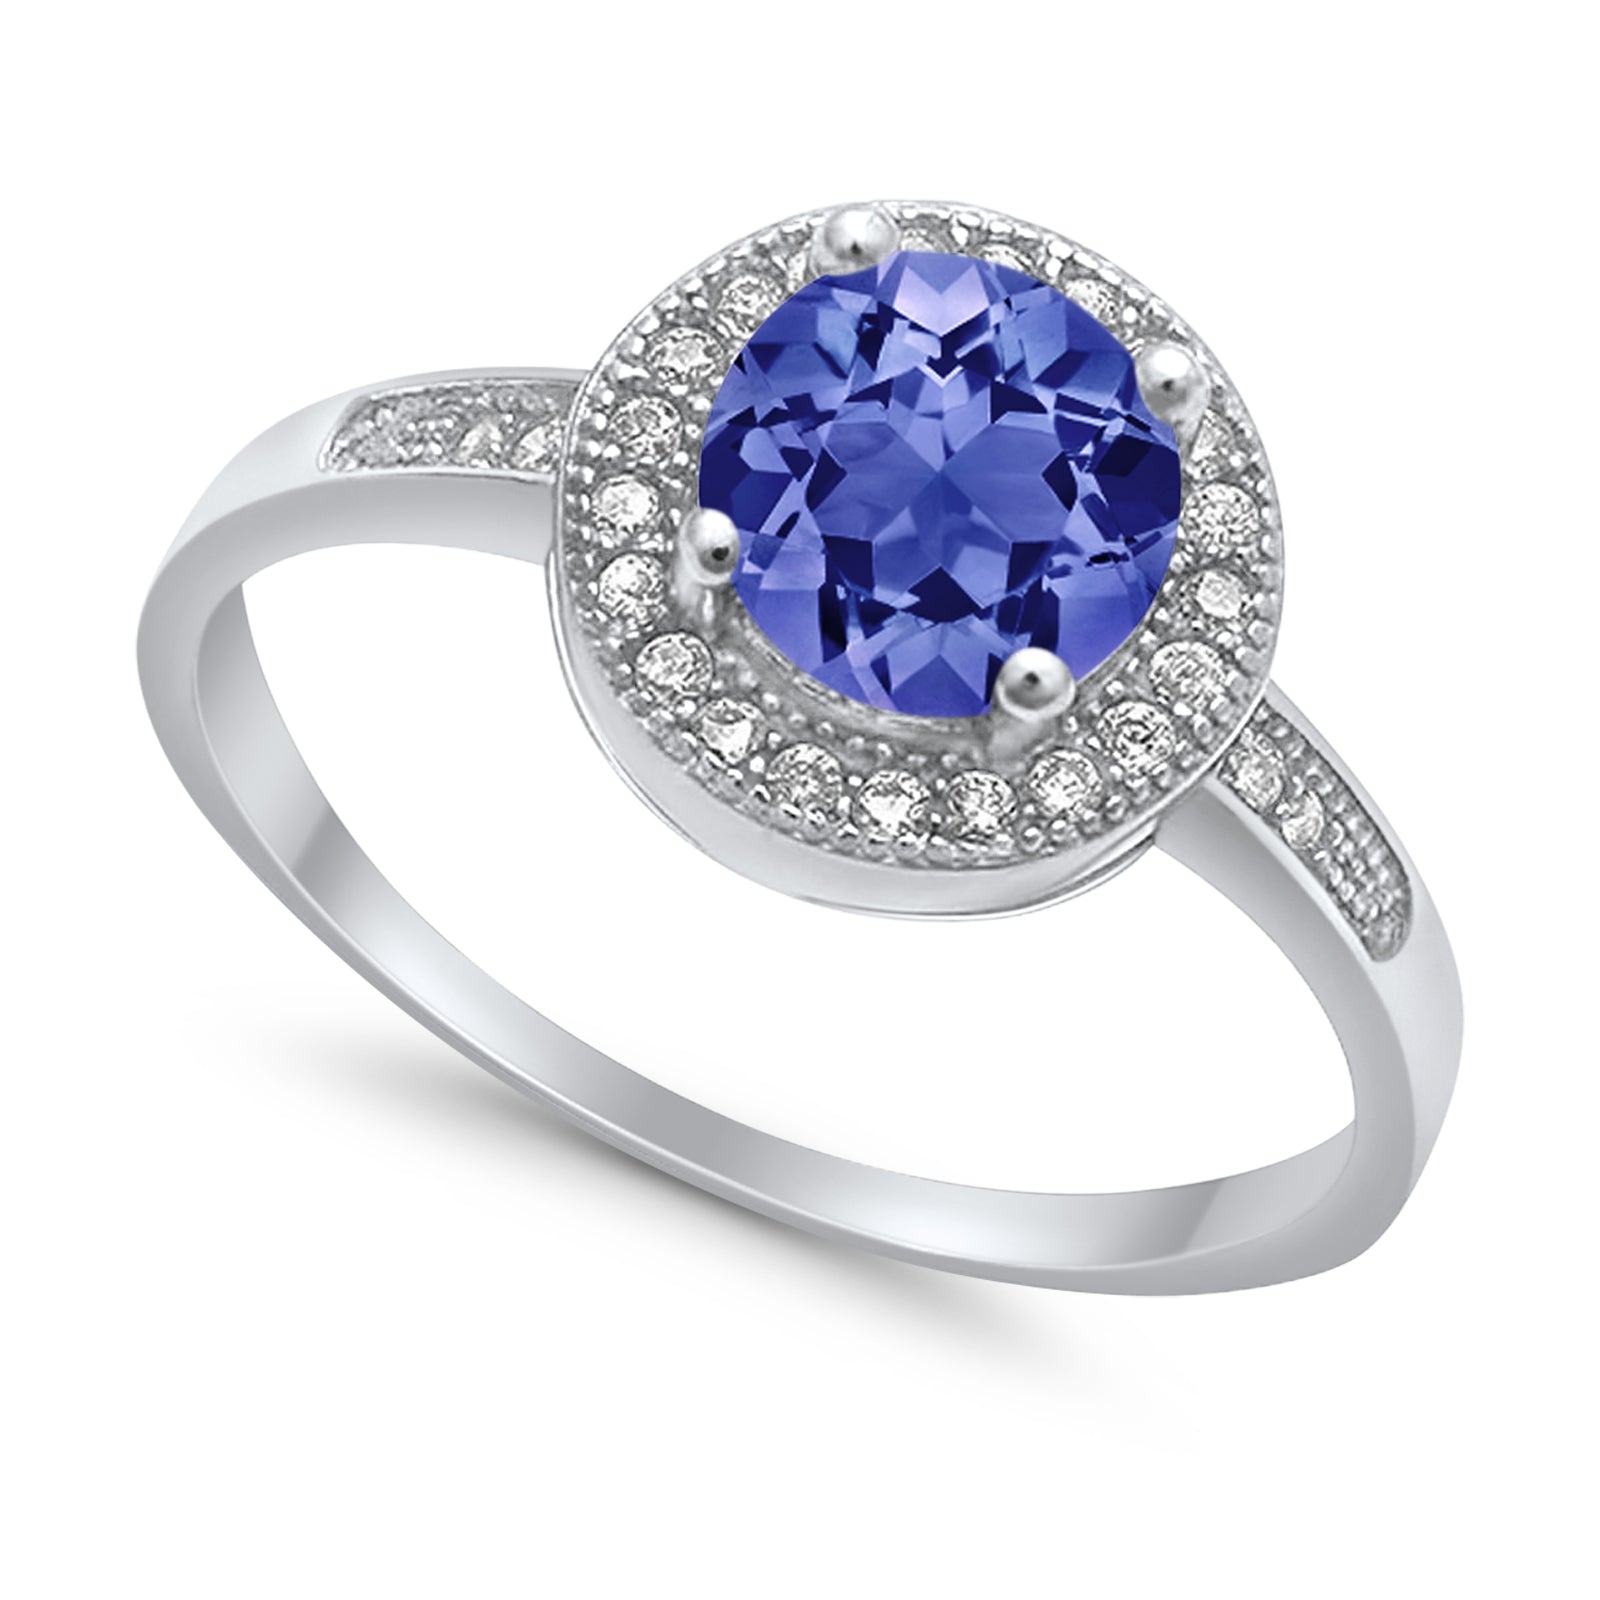 Halo Engagement Ring Round Simulated Tanzanite CZ 925 Sterling Silver